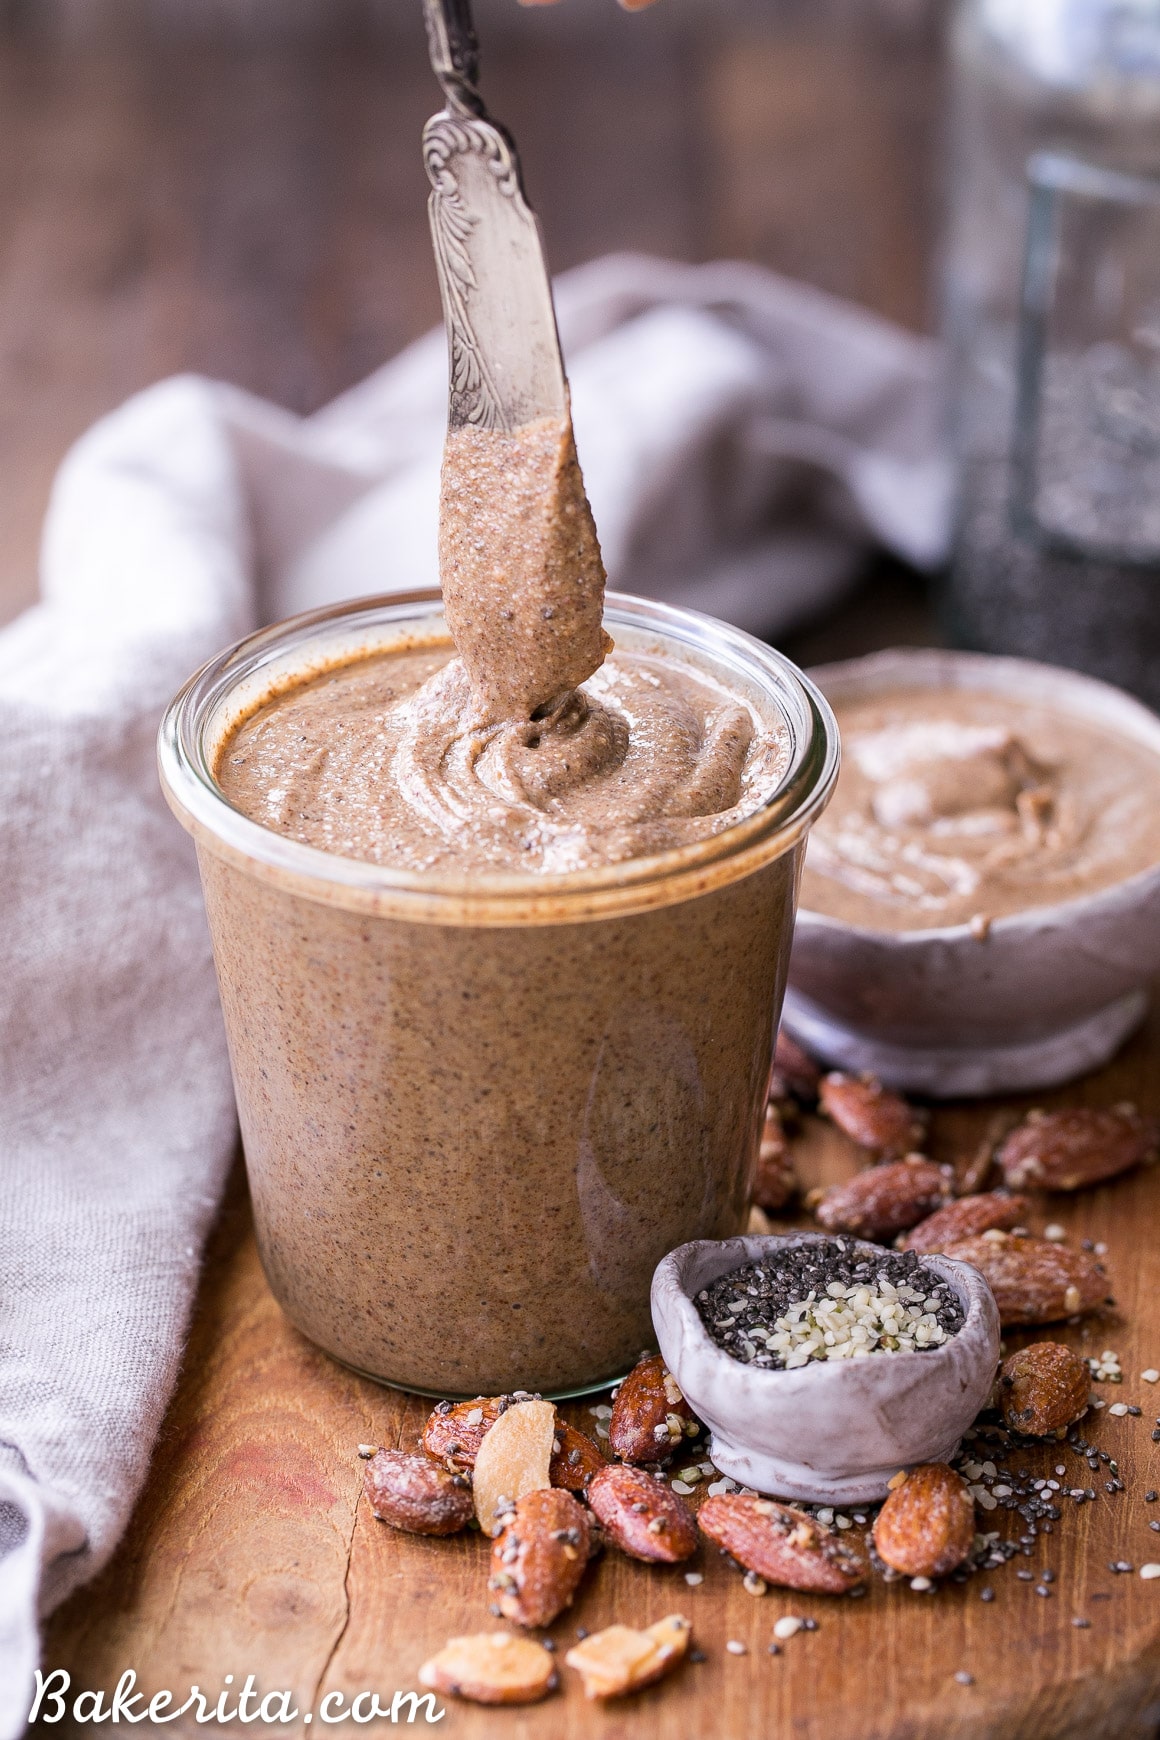 This Maple Almond Butter is made with maple roasted almonds and a hint of vanilla, and made even more nutritious with sunflower seeds, chia seeds, flax seeds, and hemp seeds! You're going to want to spread this almond butter on everything.